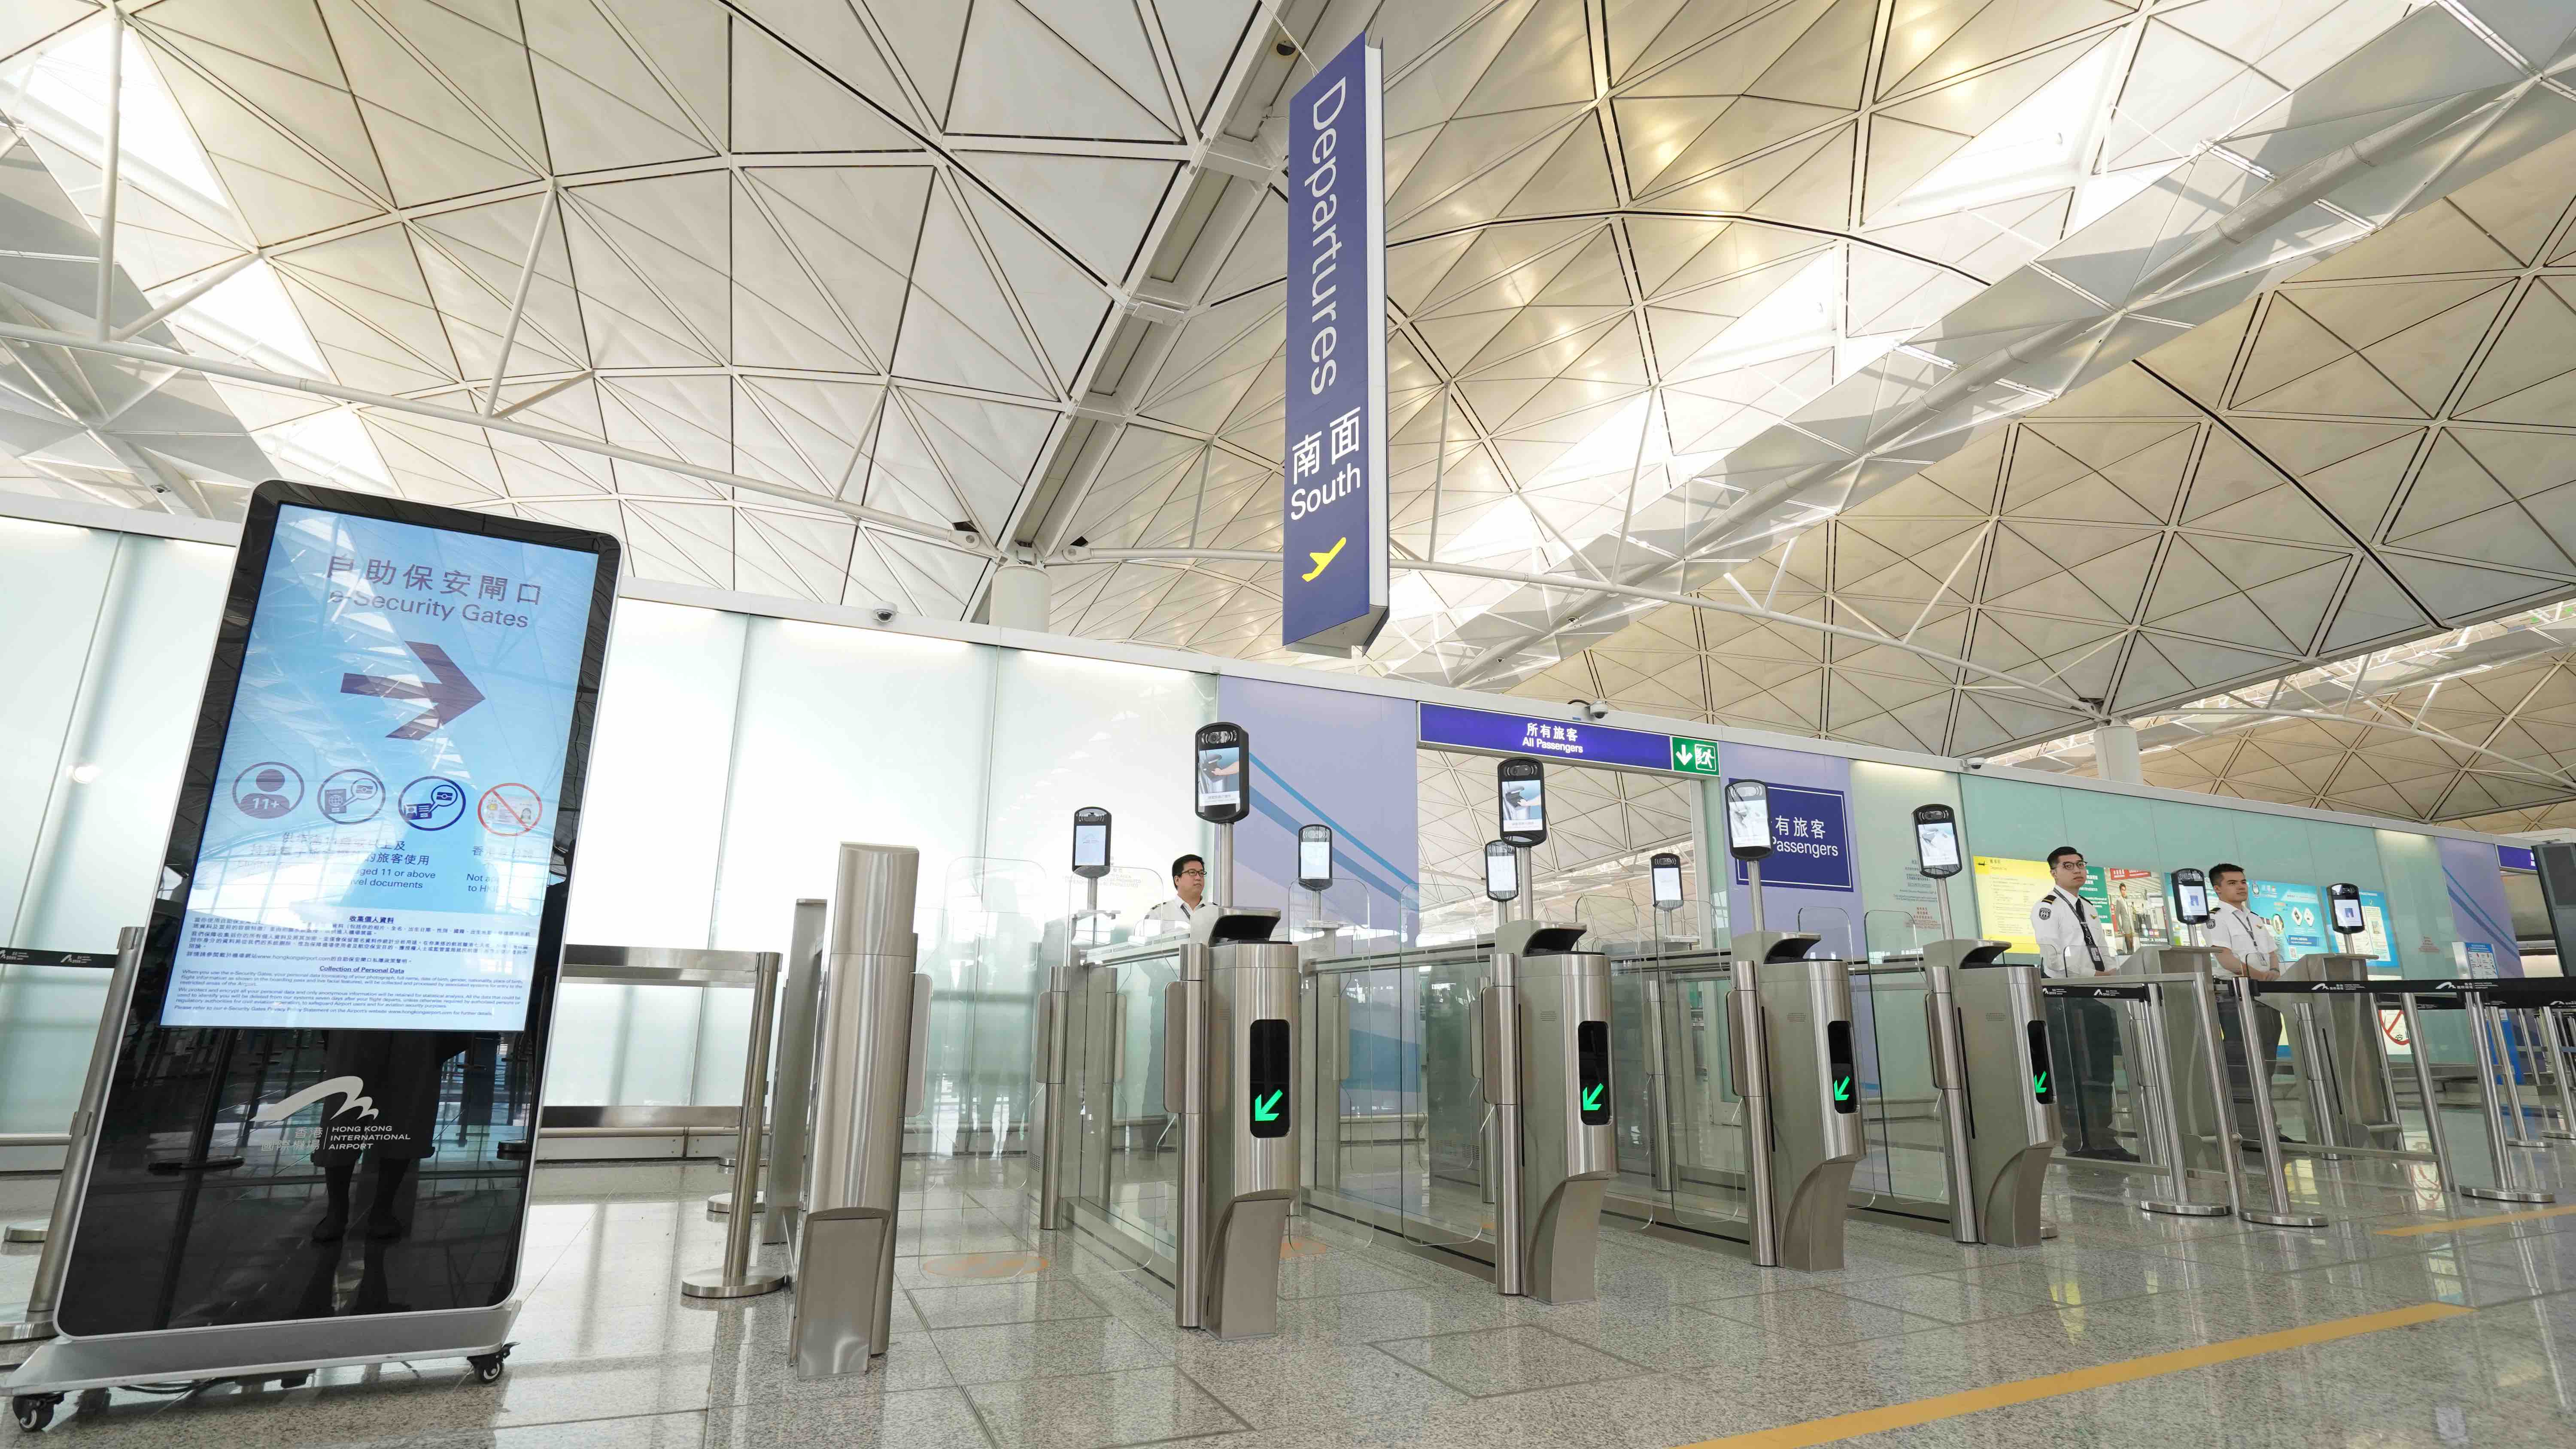 Smart gates at HK airport to speed up getting to boarding zone Coconuts